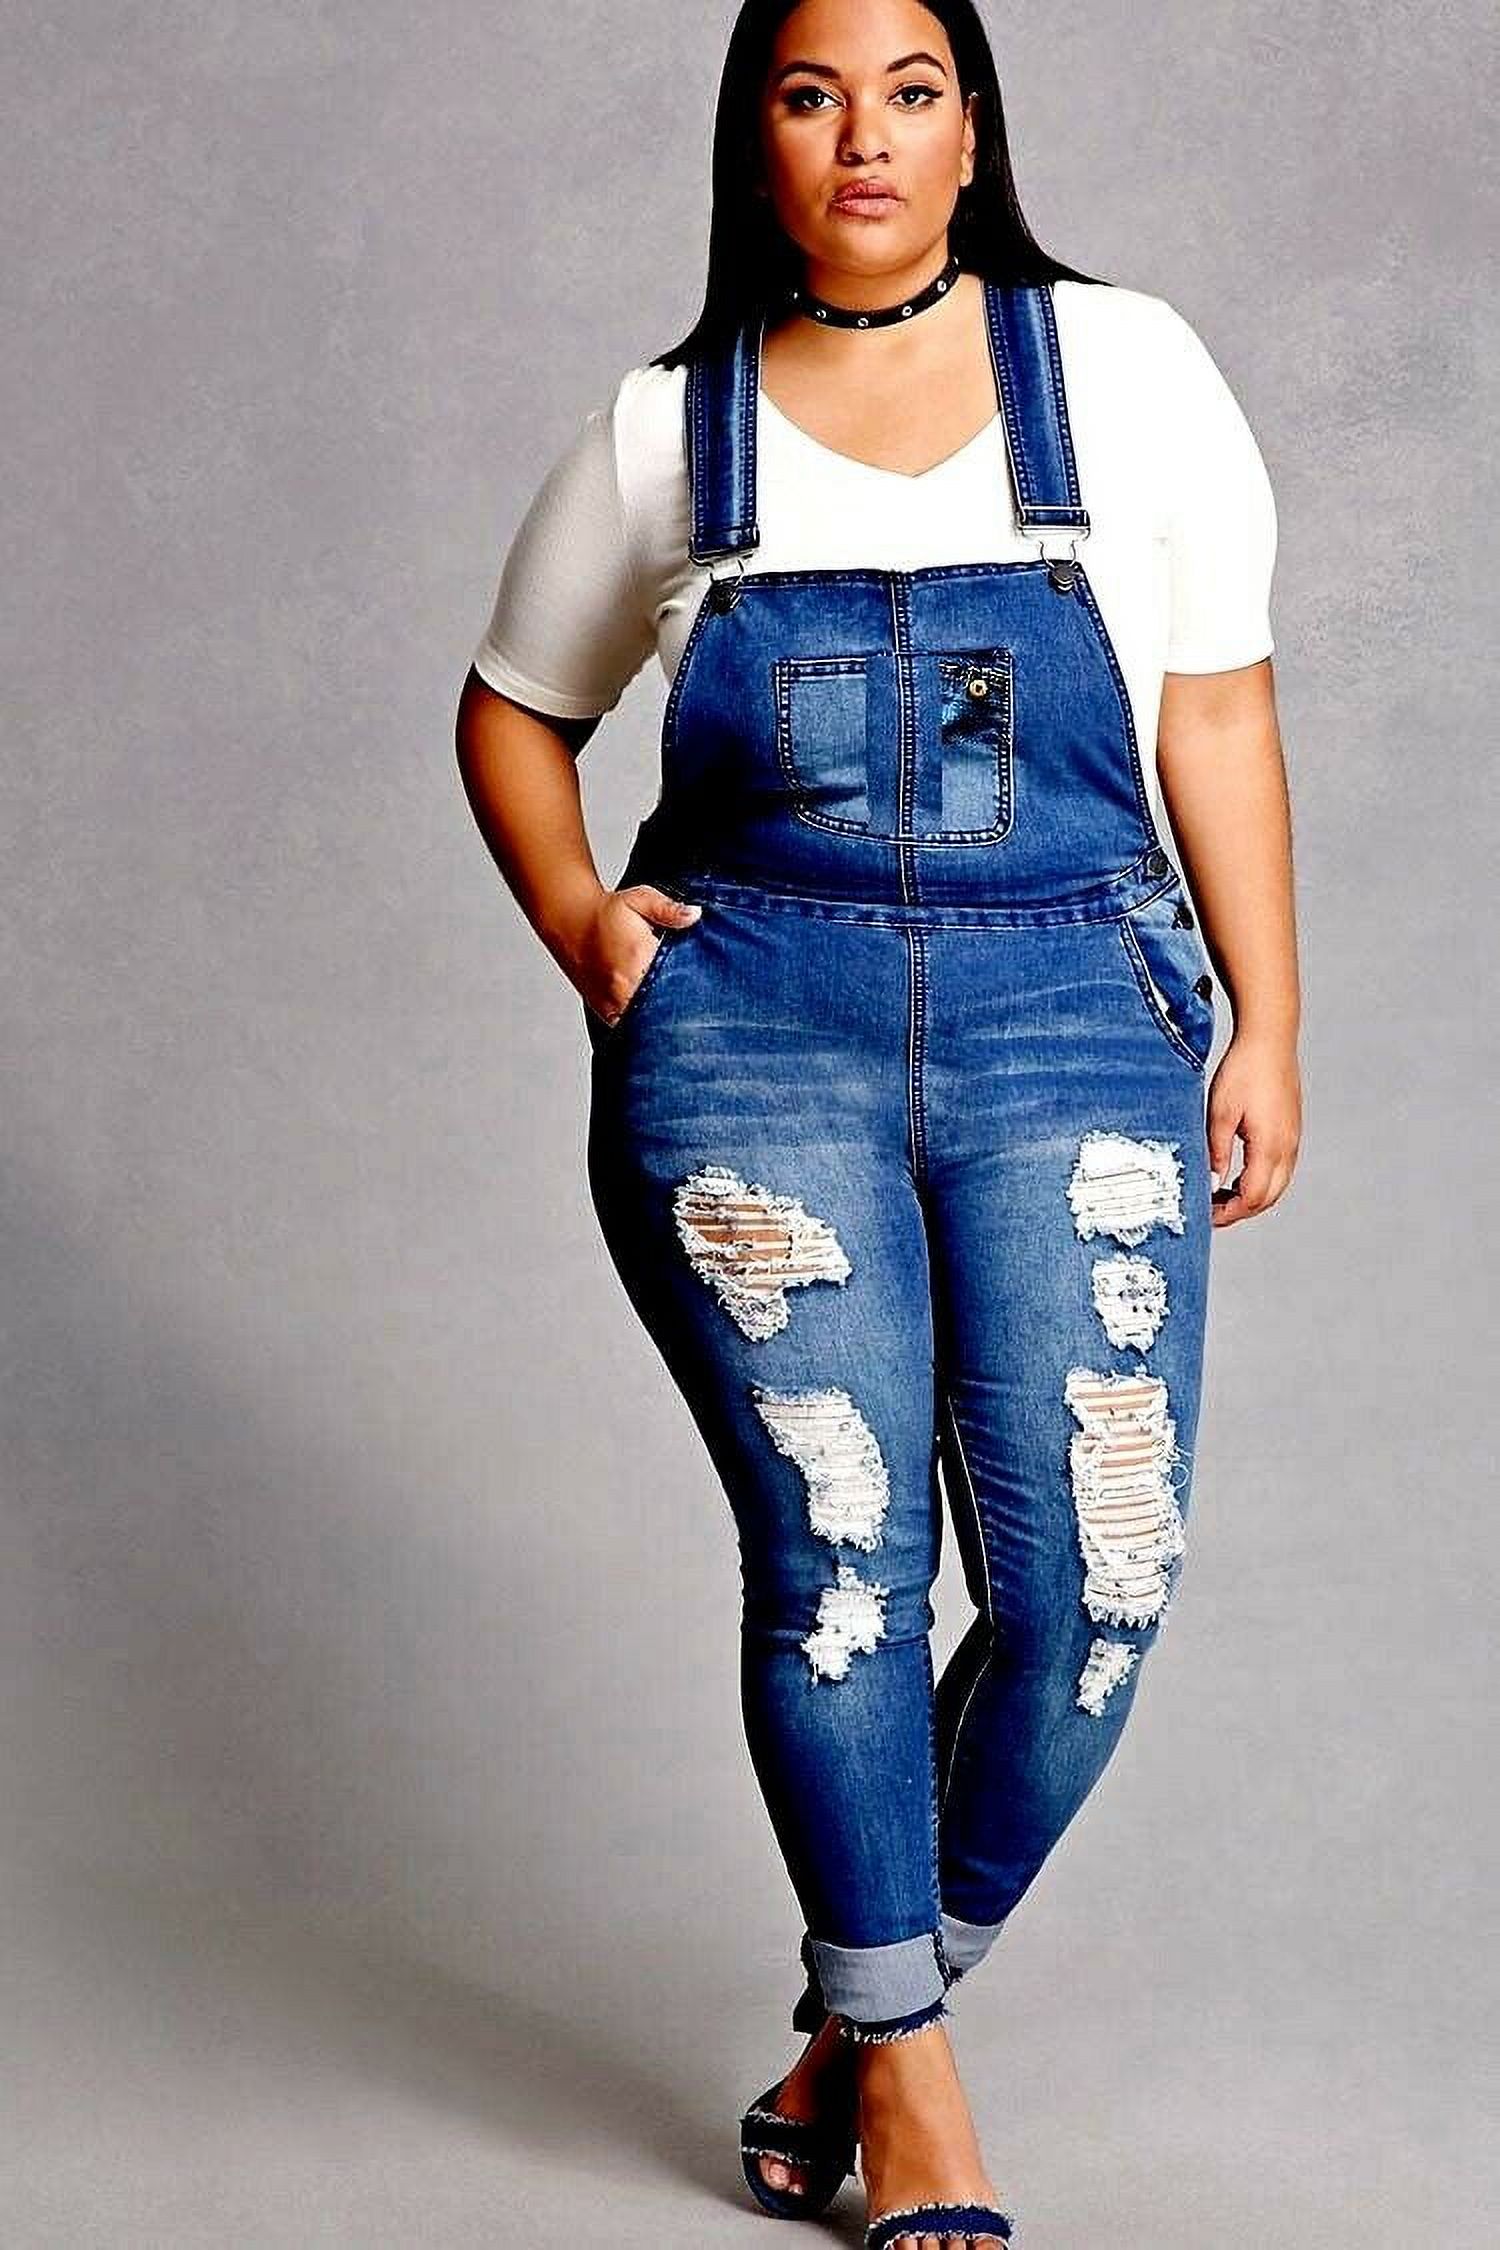 Women's Plus Size Long Overalls Jumpsuit Distressed Stretch Denim Jeans - image 3 of 4